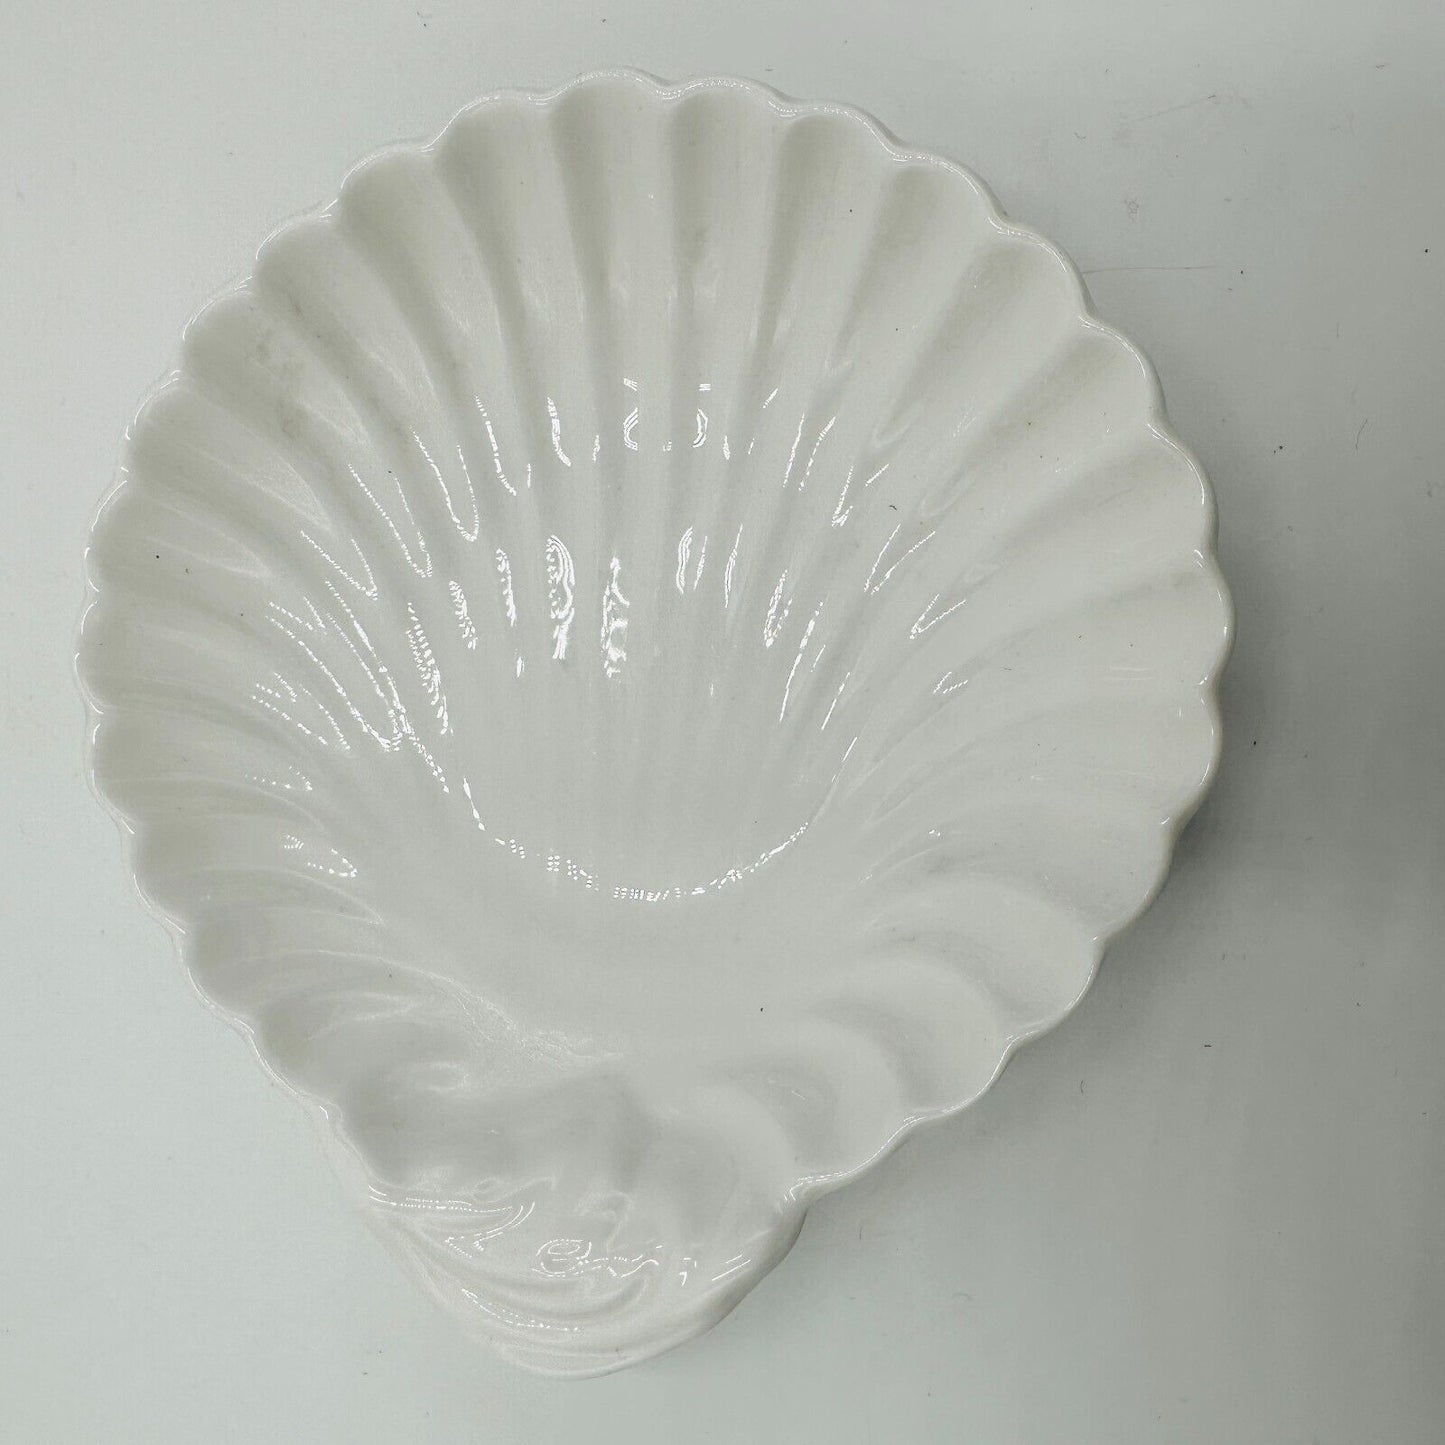 Spode Butter Dish Imperial Fancies Sea Shell Serving Plate-England Soap Copeland